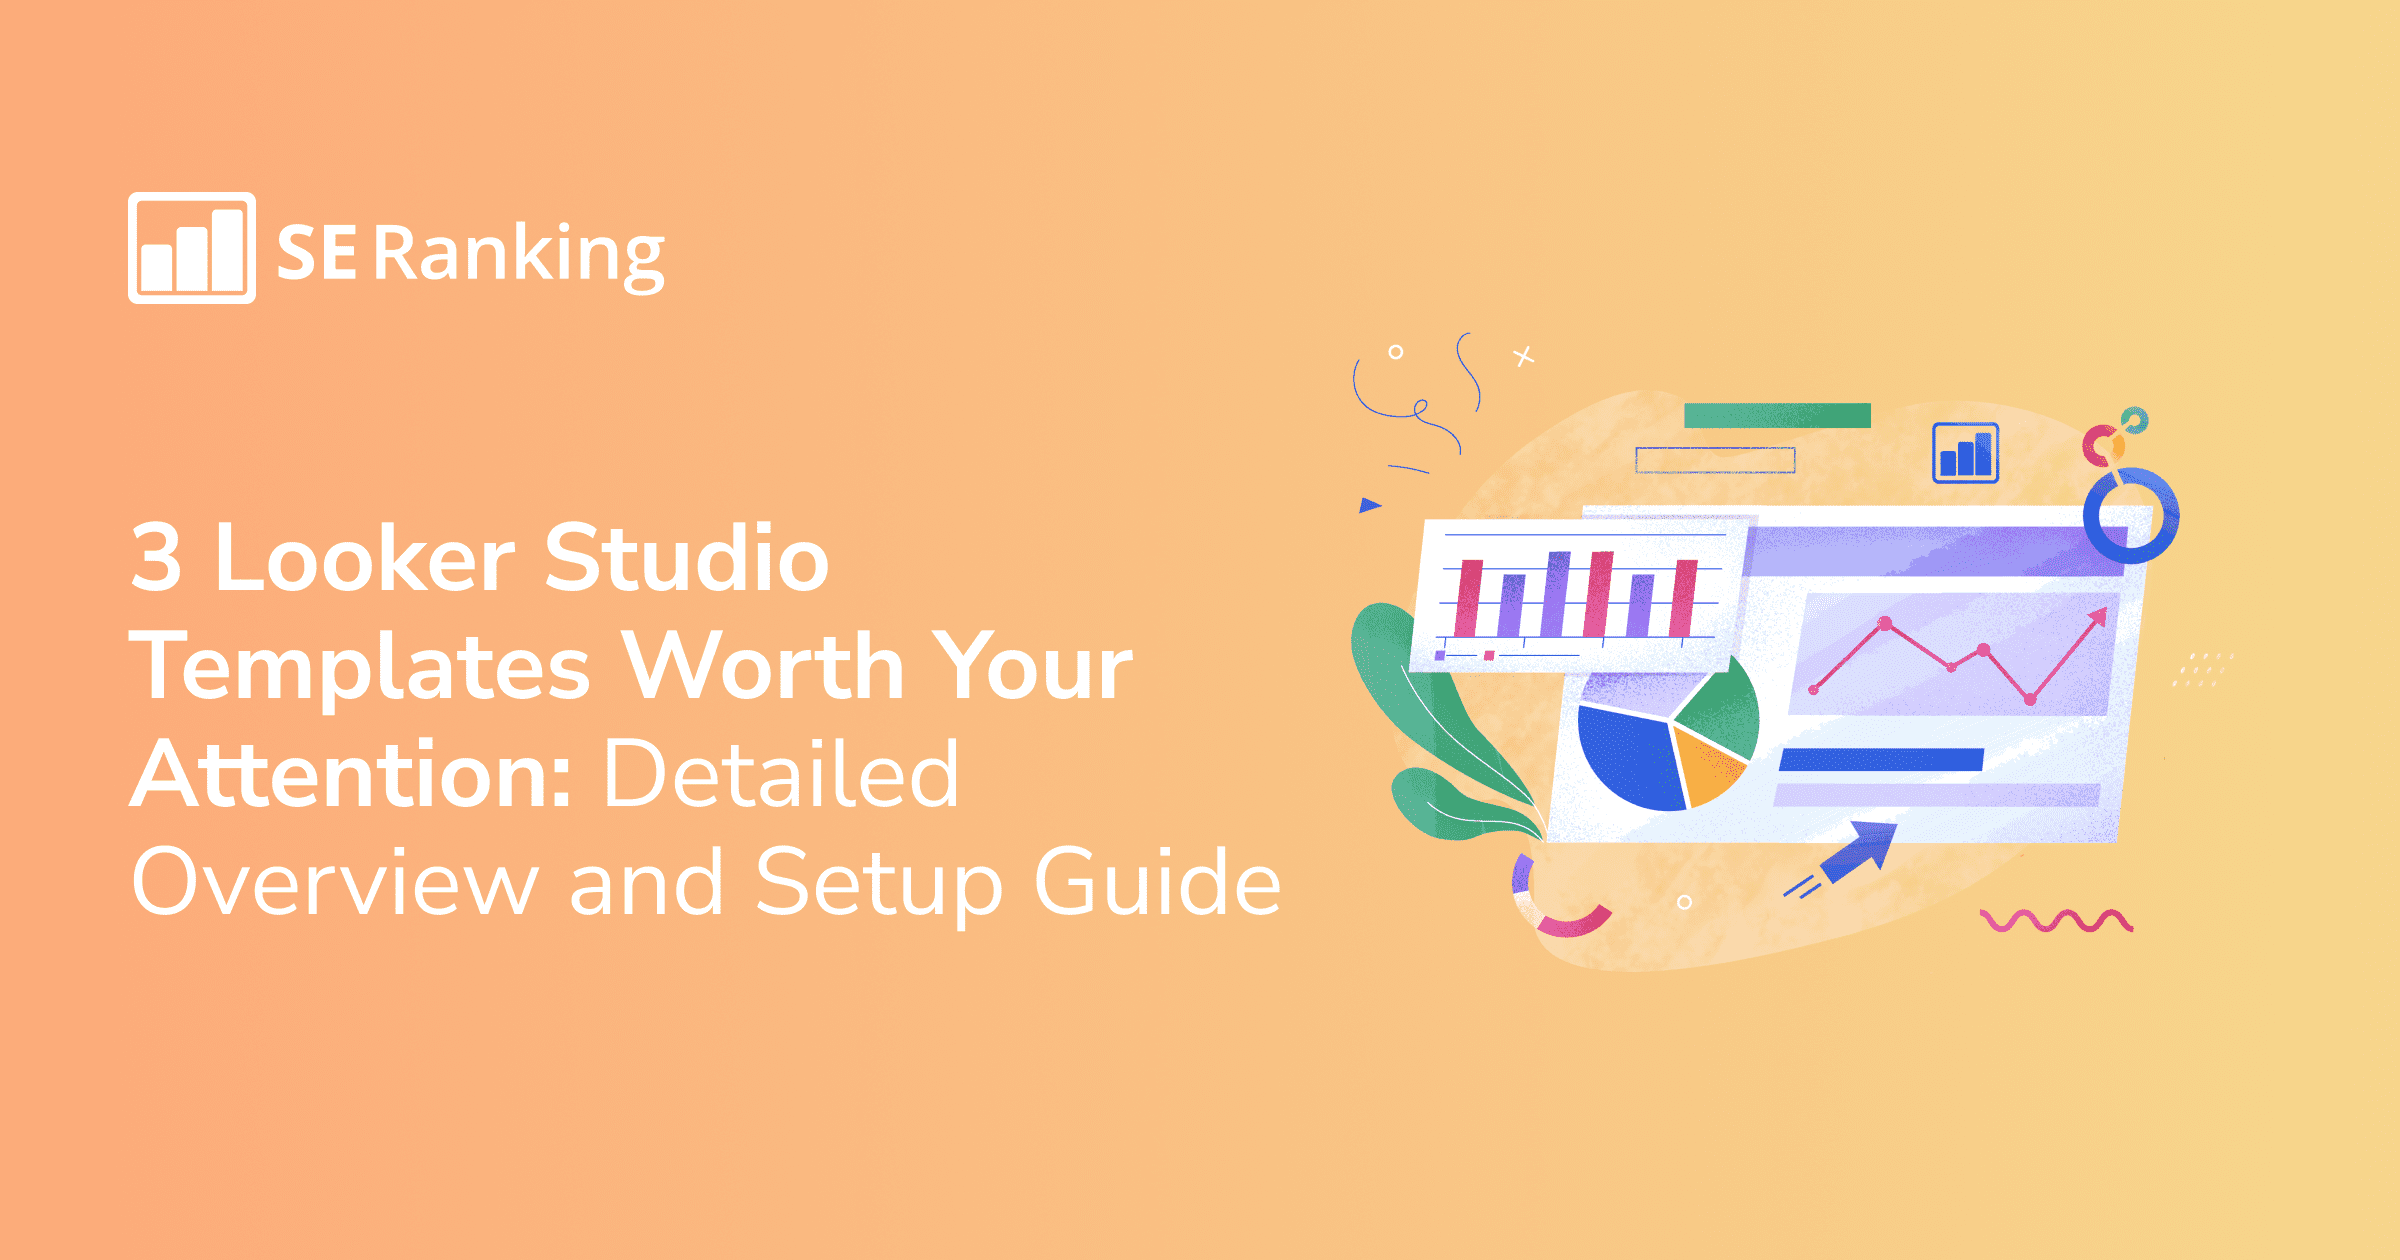 3 Google Looker Studio Templates for SEO with a Setup Guide